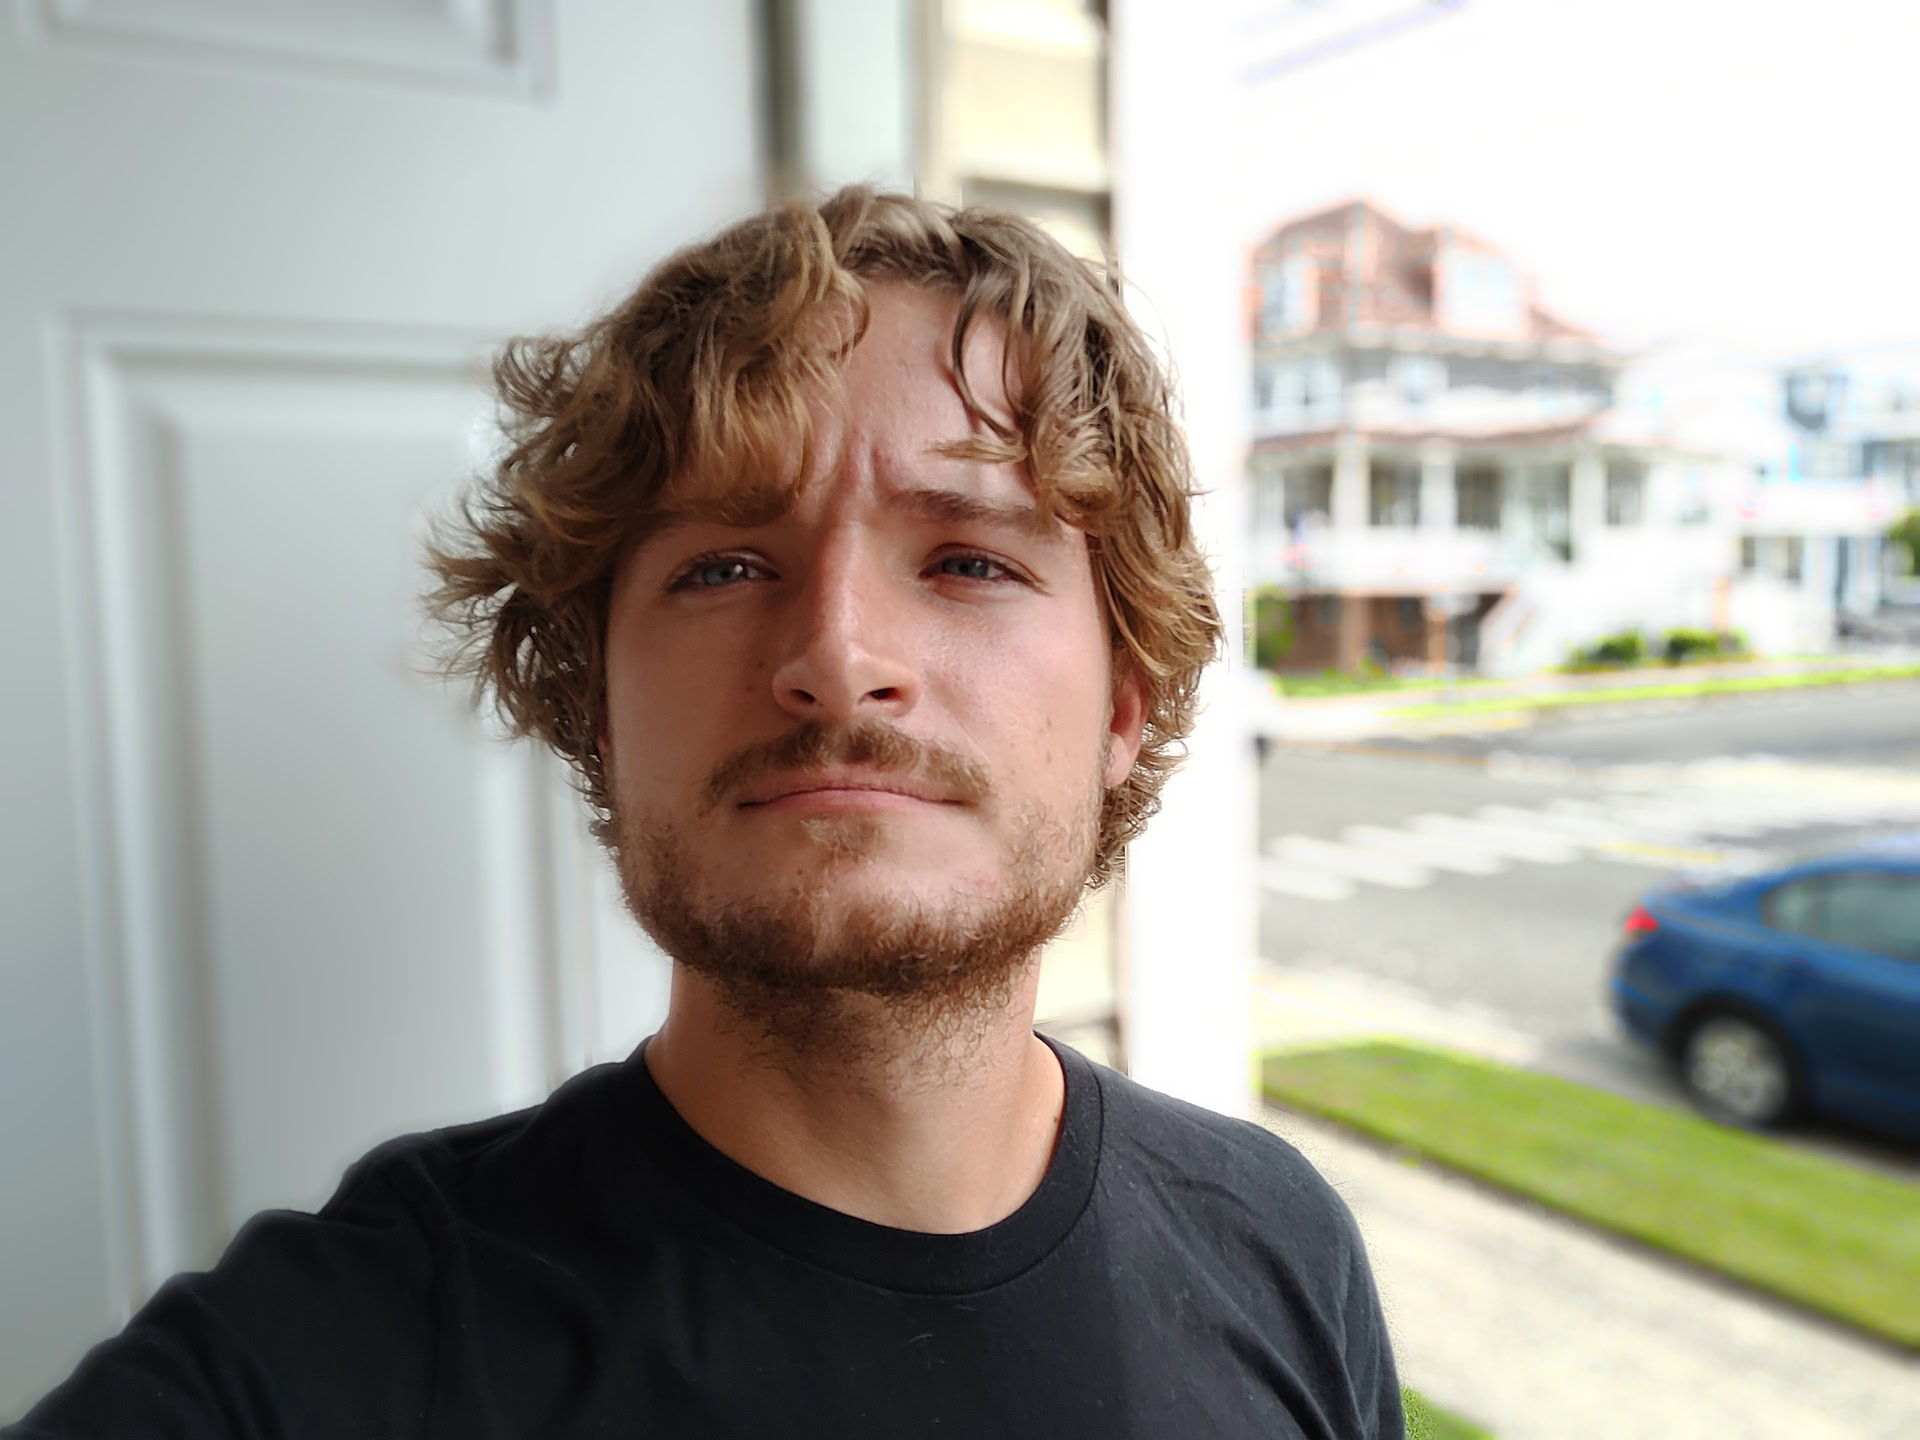 A portrait selfie taken with the ZTE Blade X1 of a man with light curly hair and a beard, wearing a black t-shirt and standing in an open doorway.